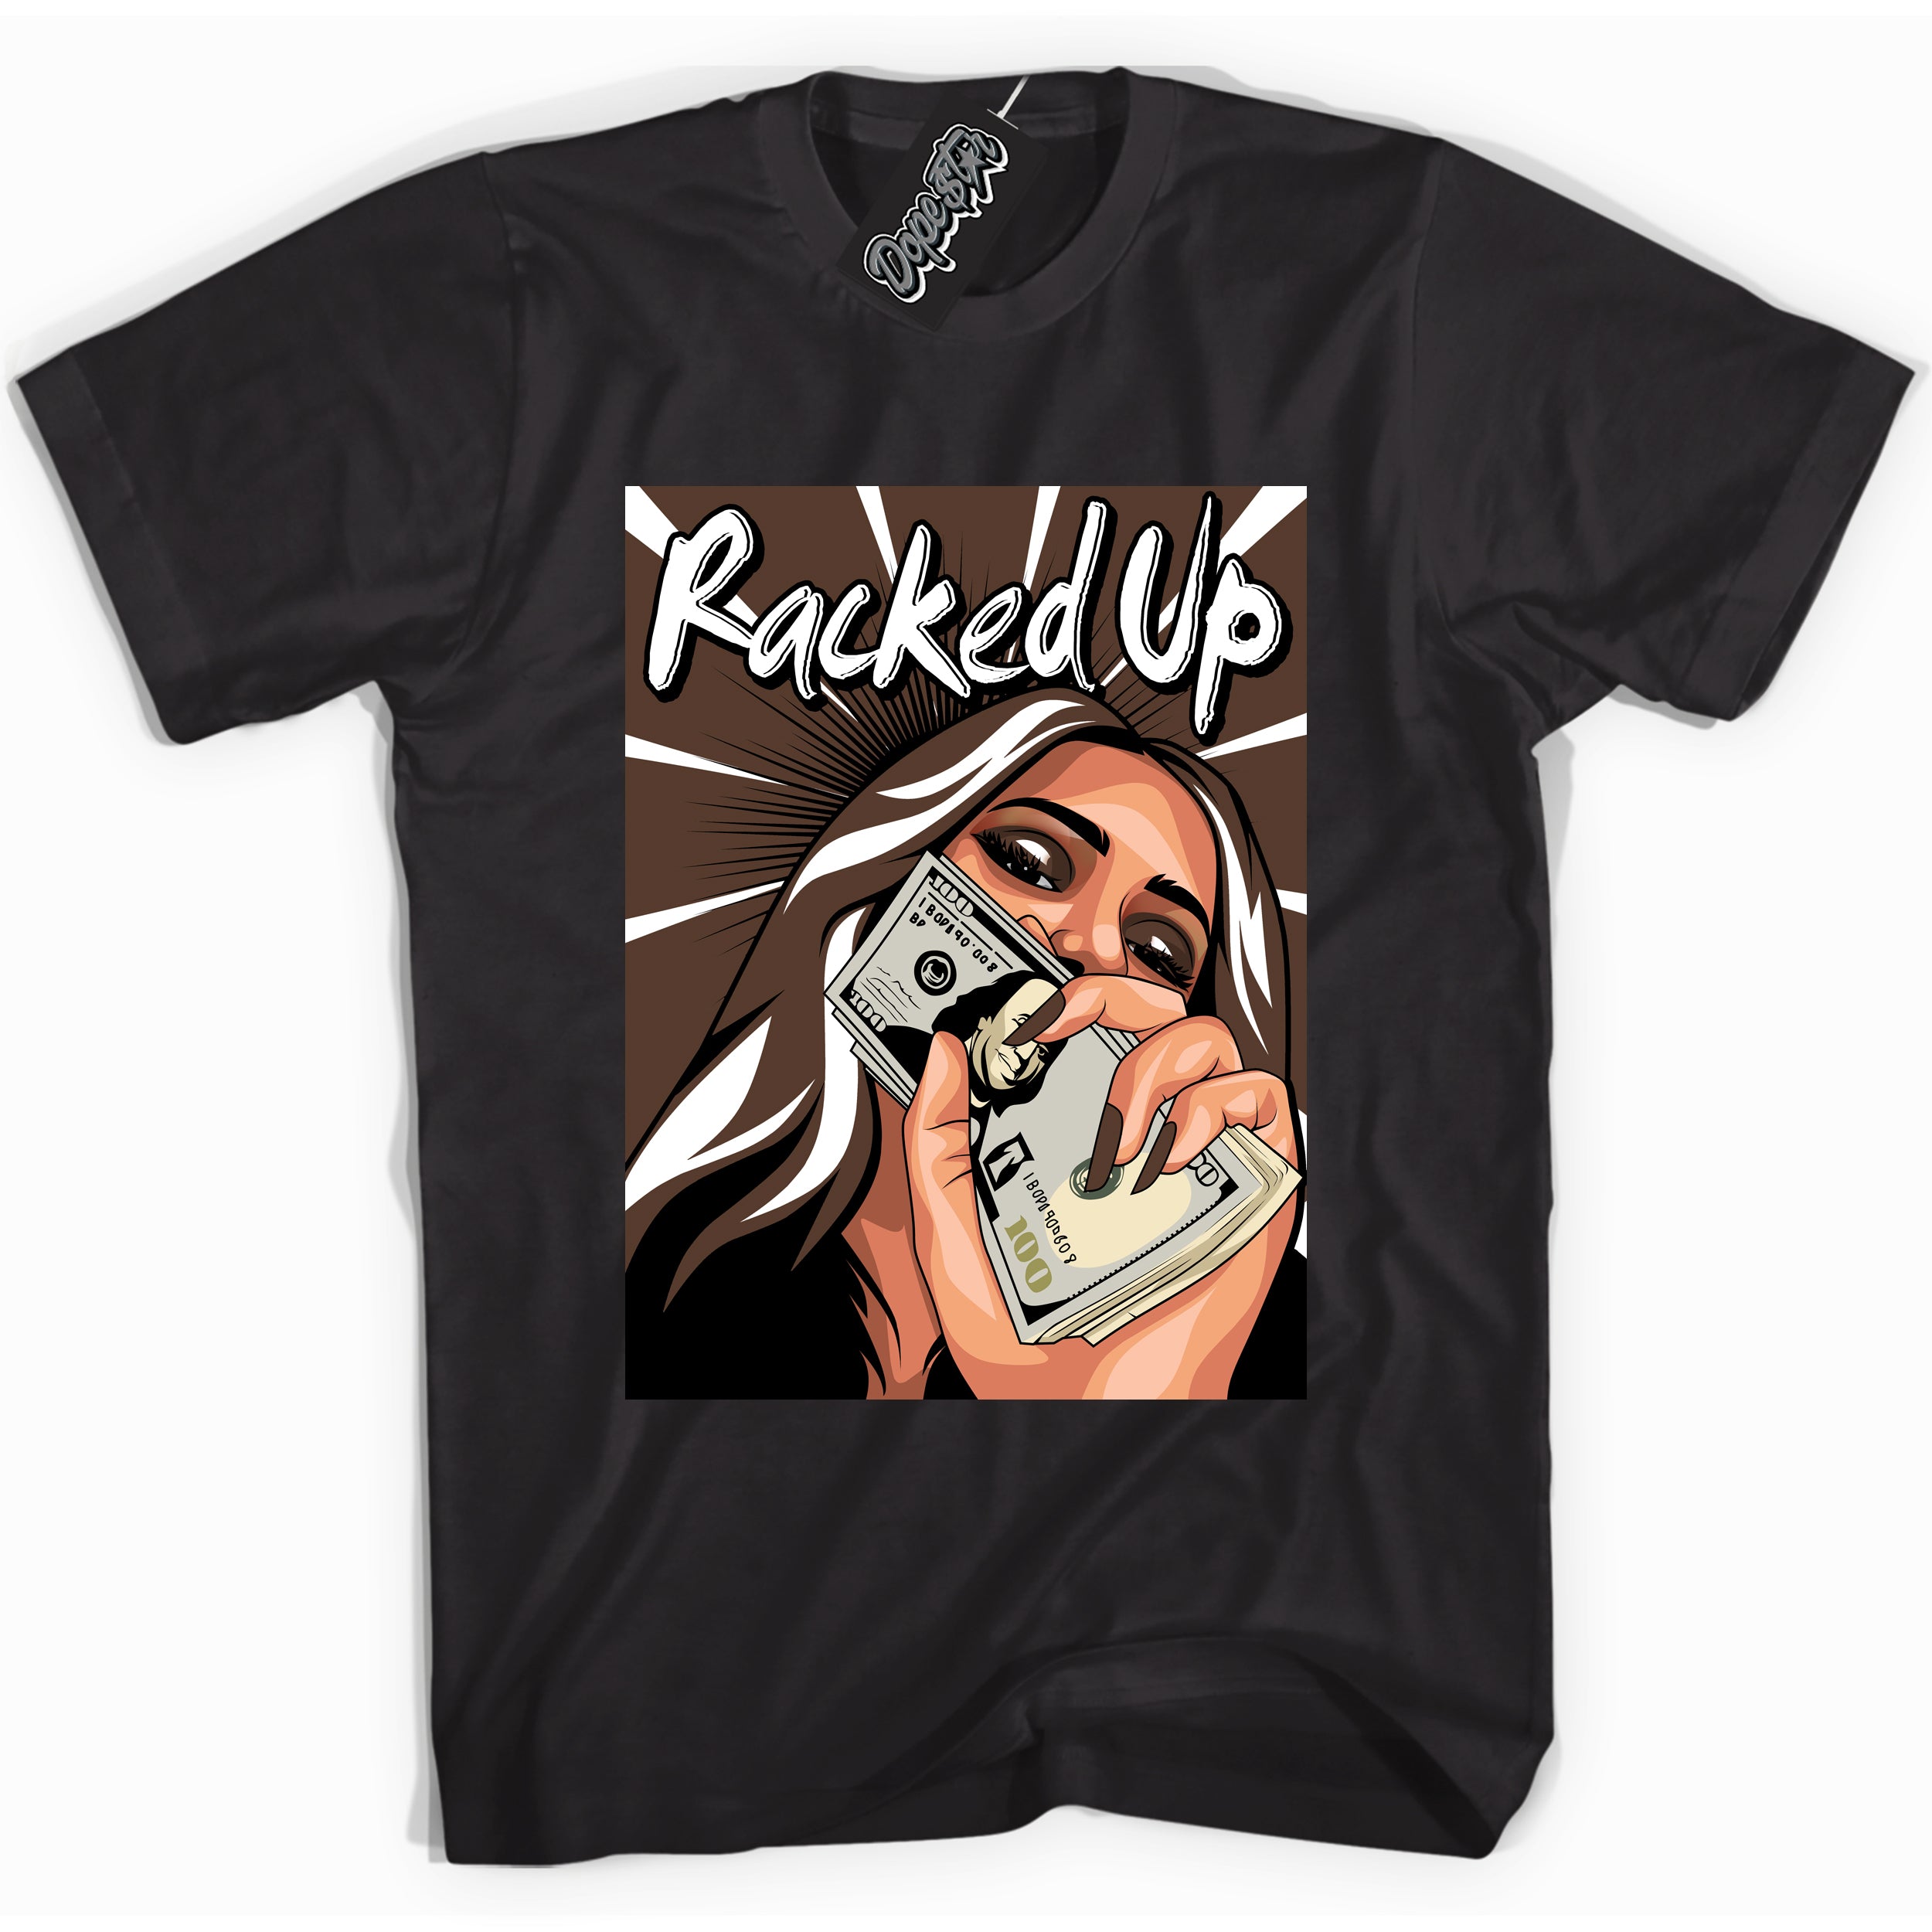 Cool Black graphic tee with “ Racked Up ” design, that perfectly matches Palomino 1s sneakers 